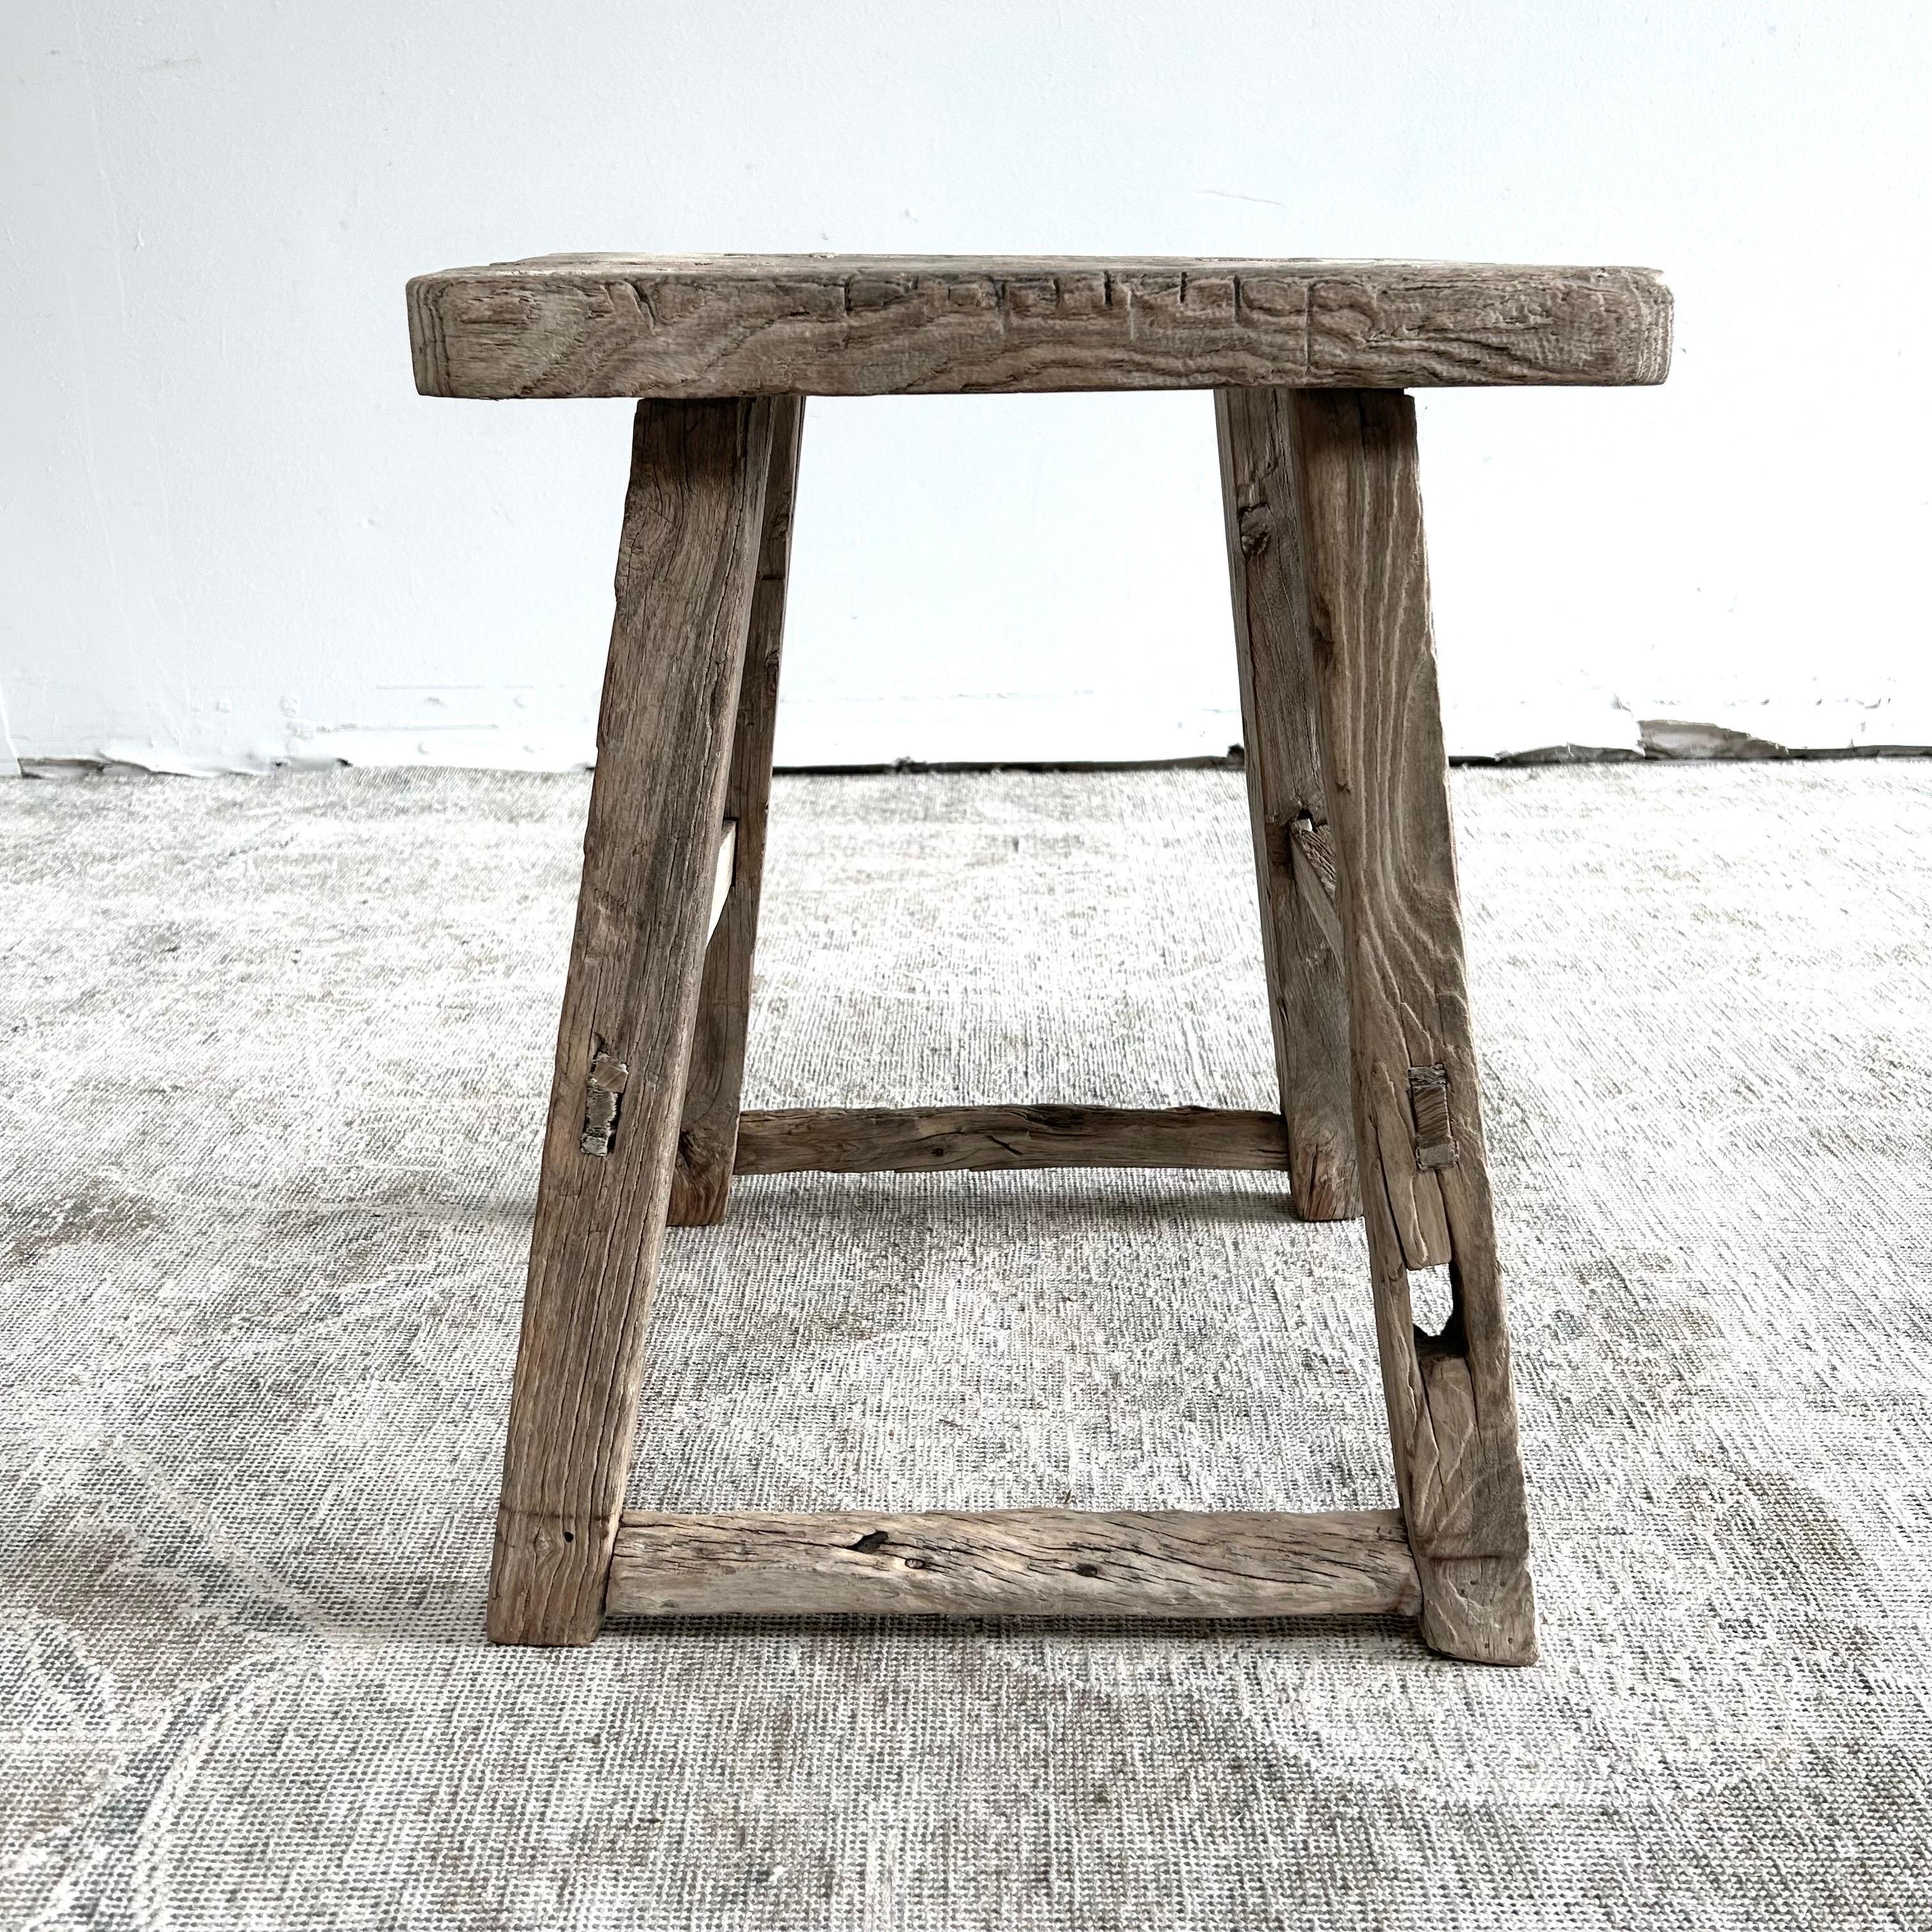 Elm stool 17”w x 16”d x 21”h
Vintage Antique elm wood stool These are the real vintage antique elm wood stools! Beautiful antique patina, with weathering and age, these are solid and sturdy ready for daily use, use as a table, stool, drink table,